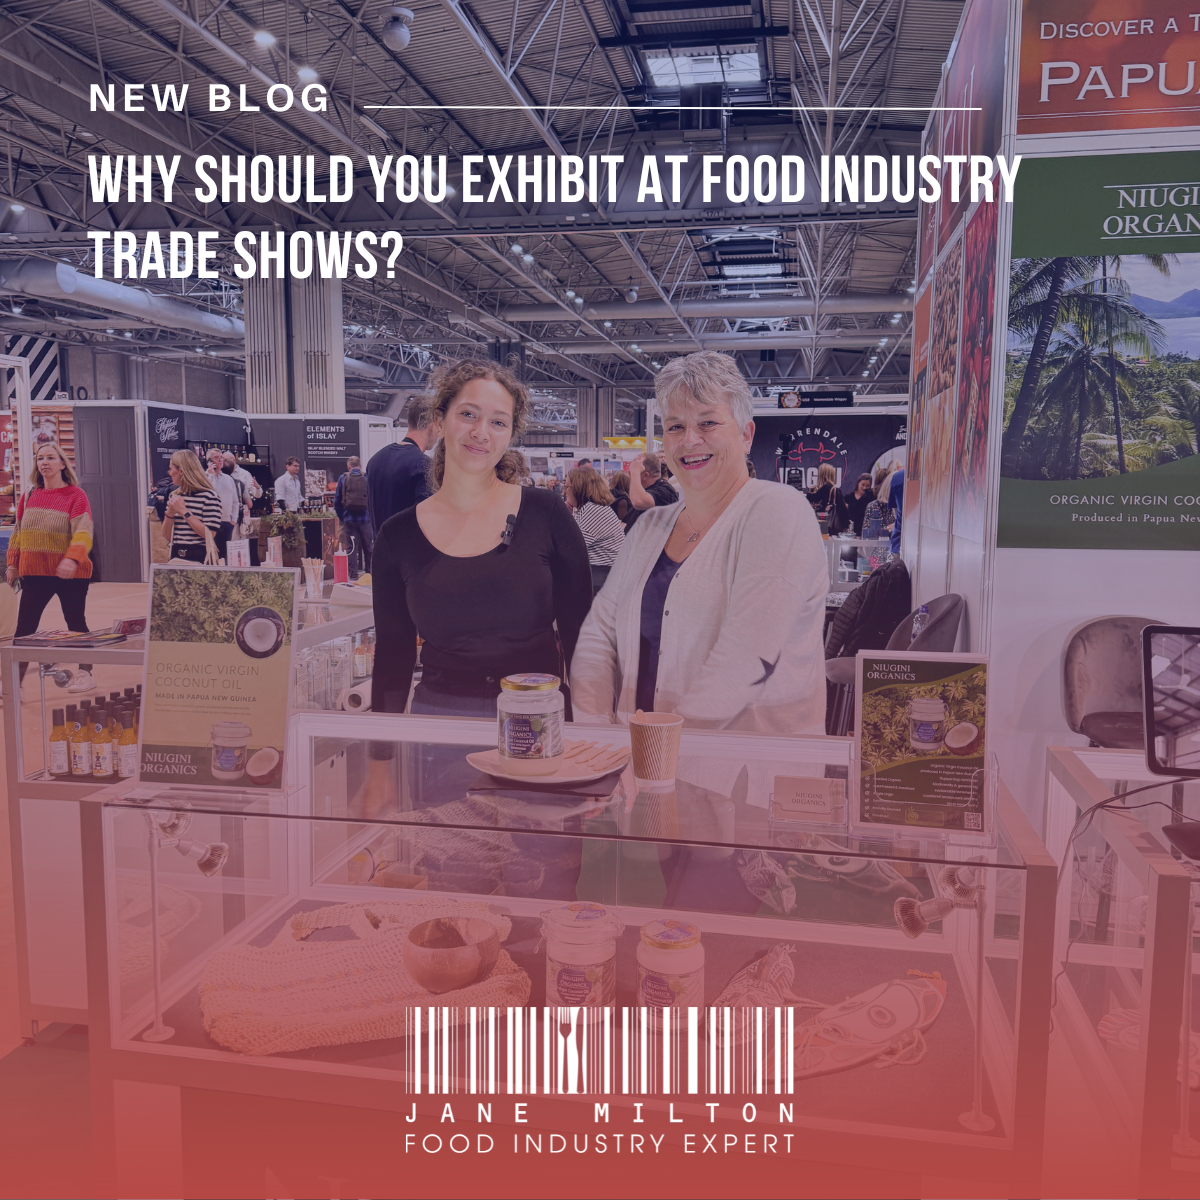 Why should you exhibit at food industry trade shows?